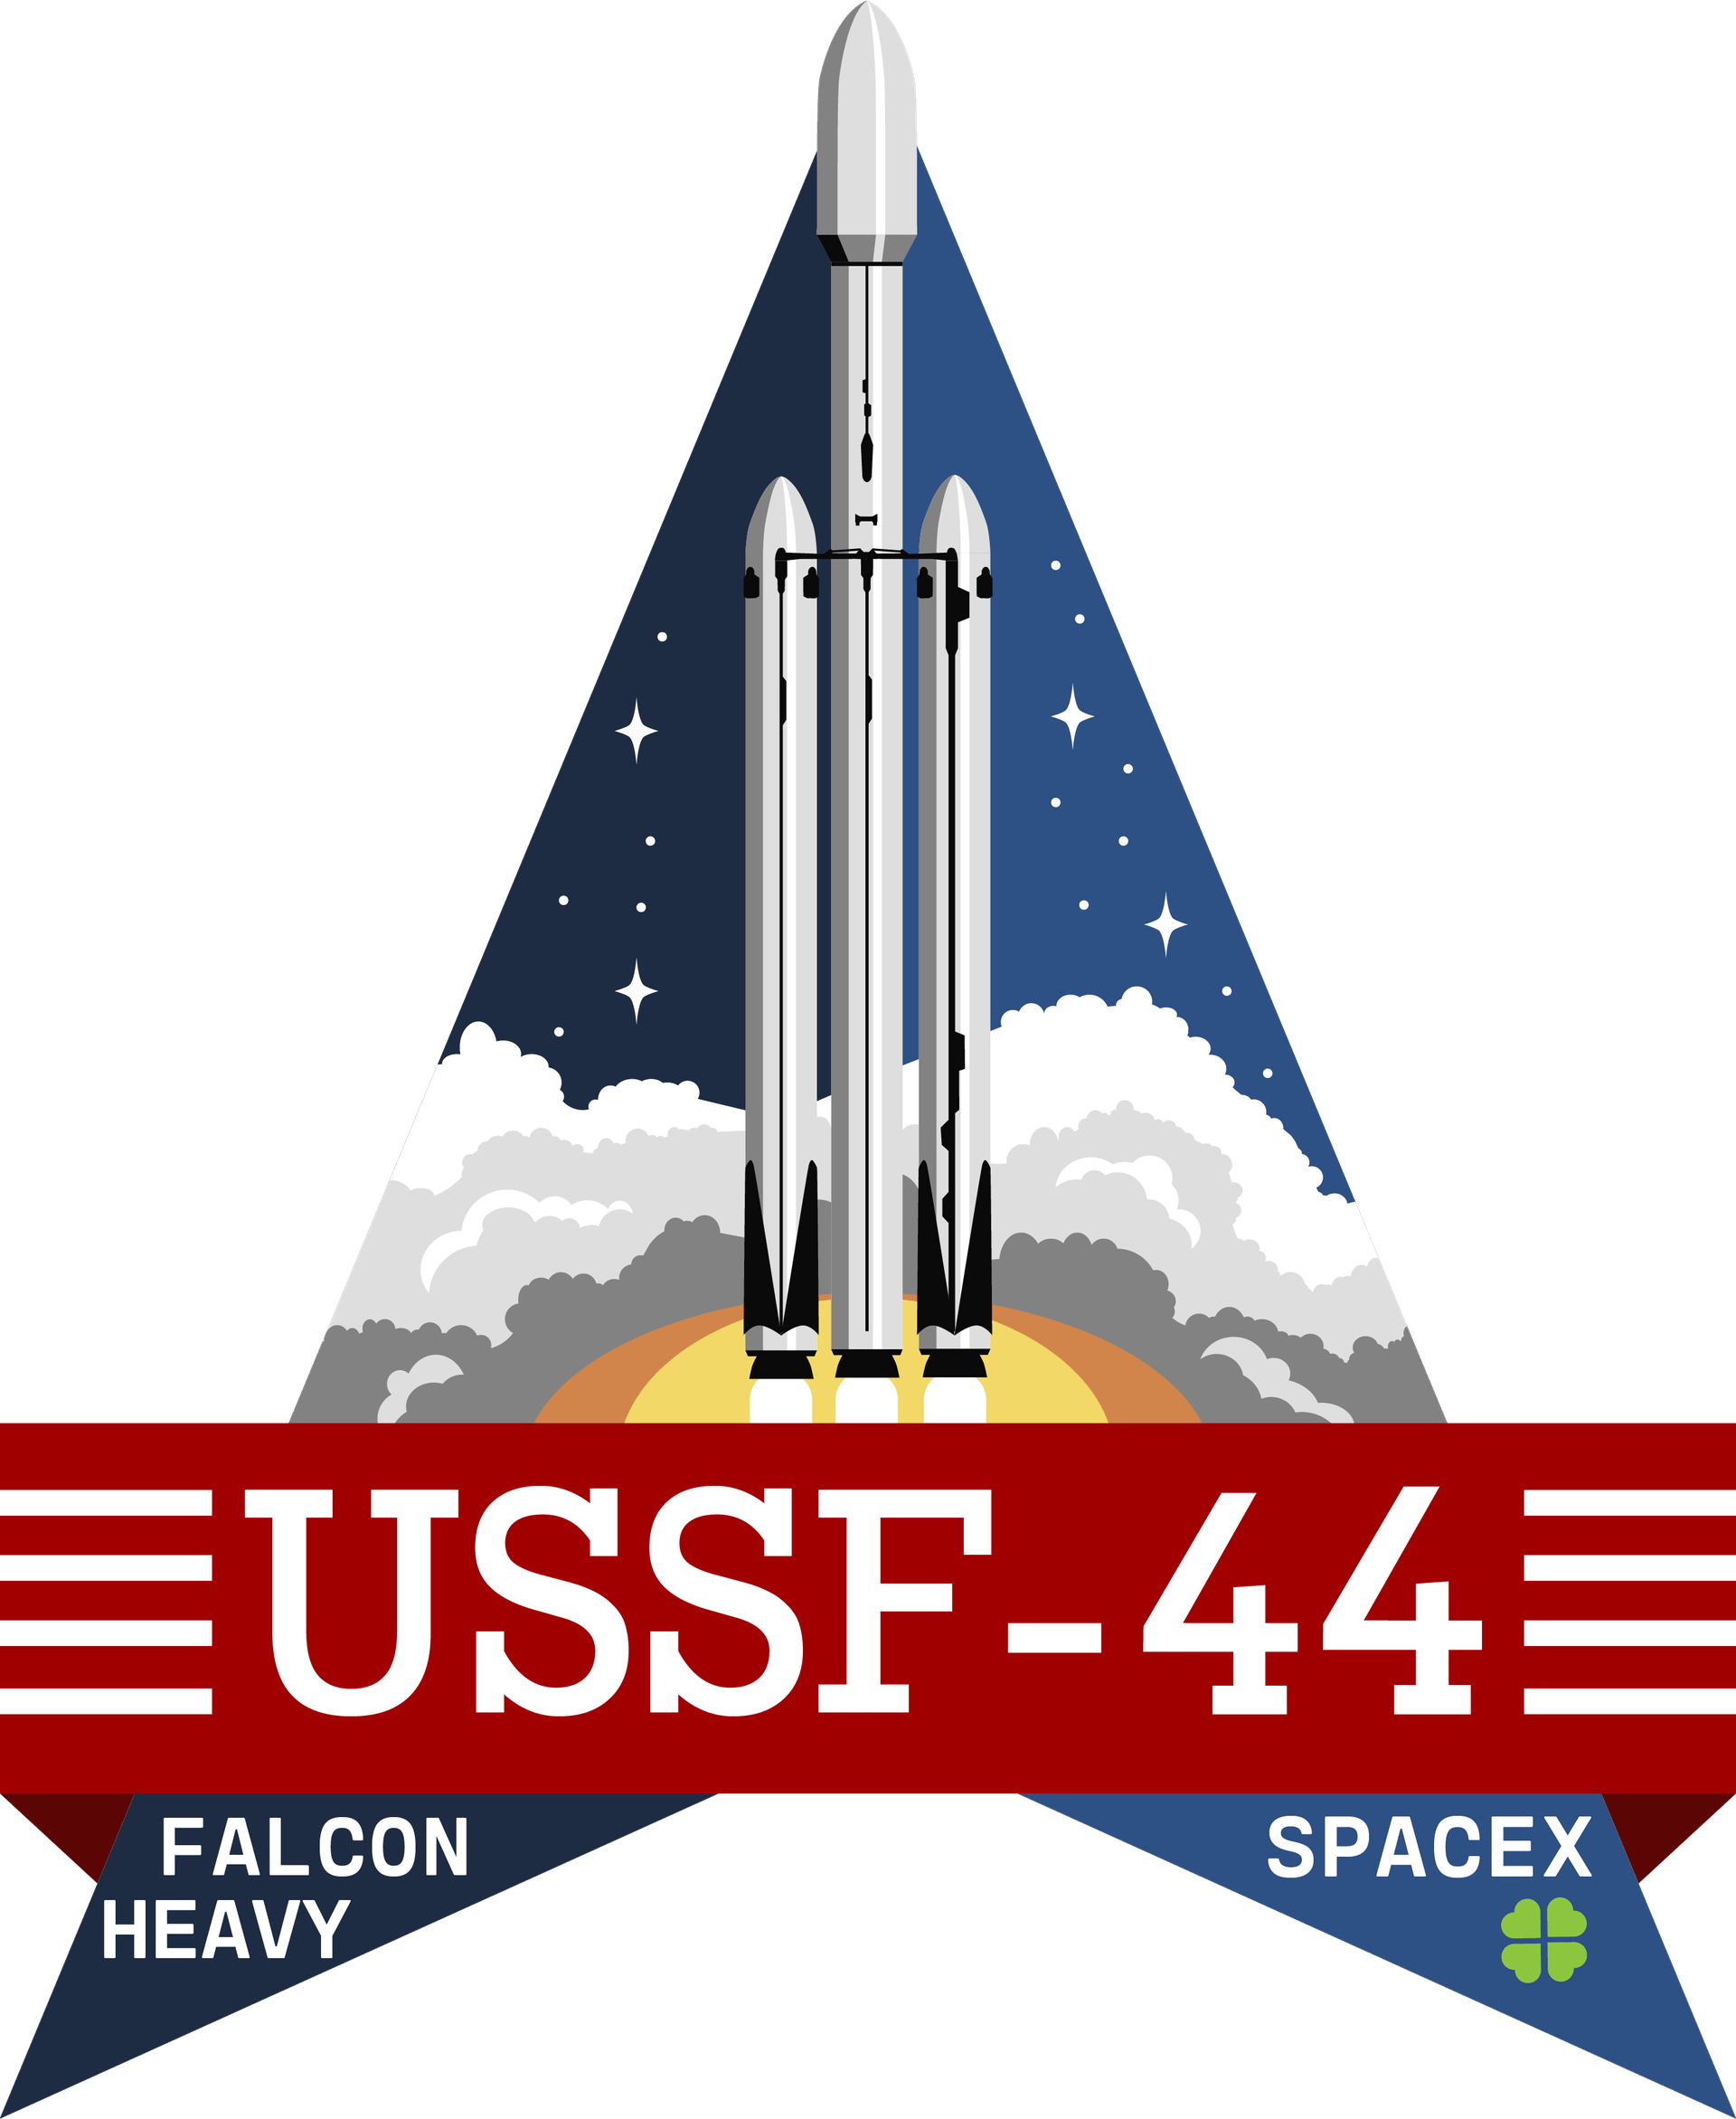 Mission patch for USSF-44